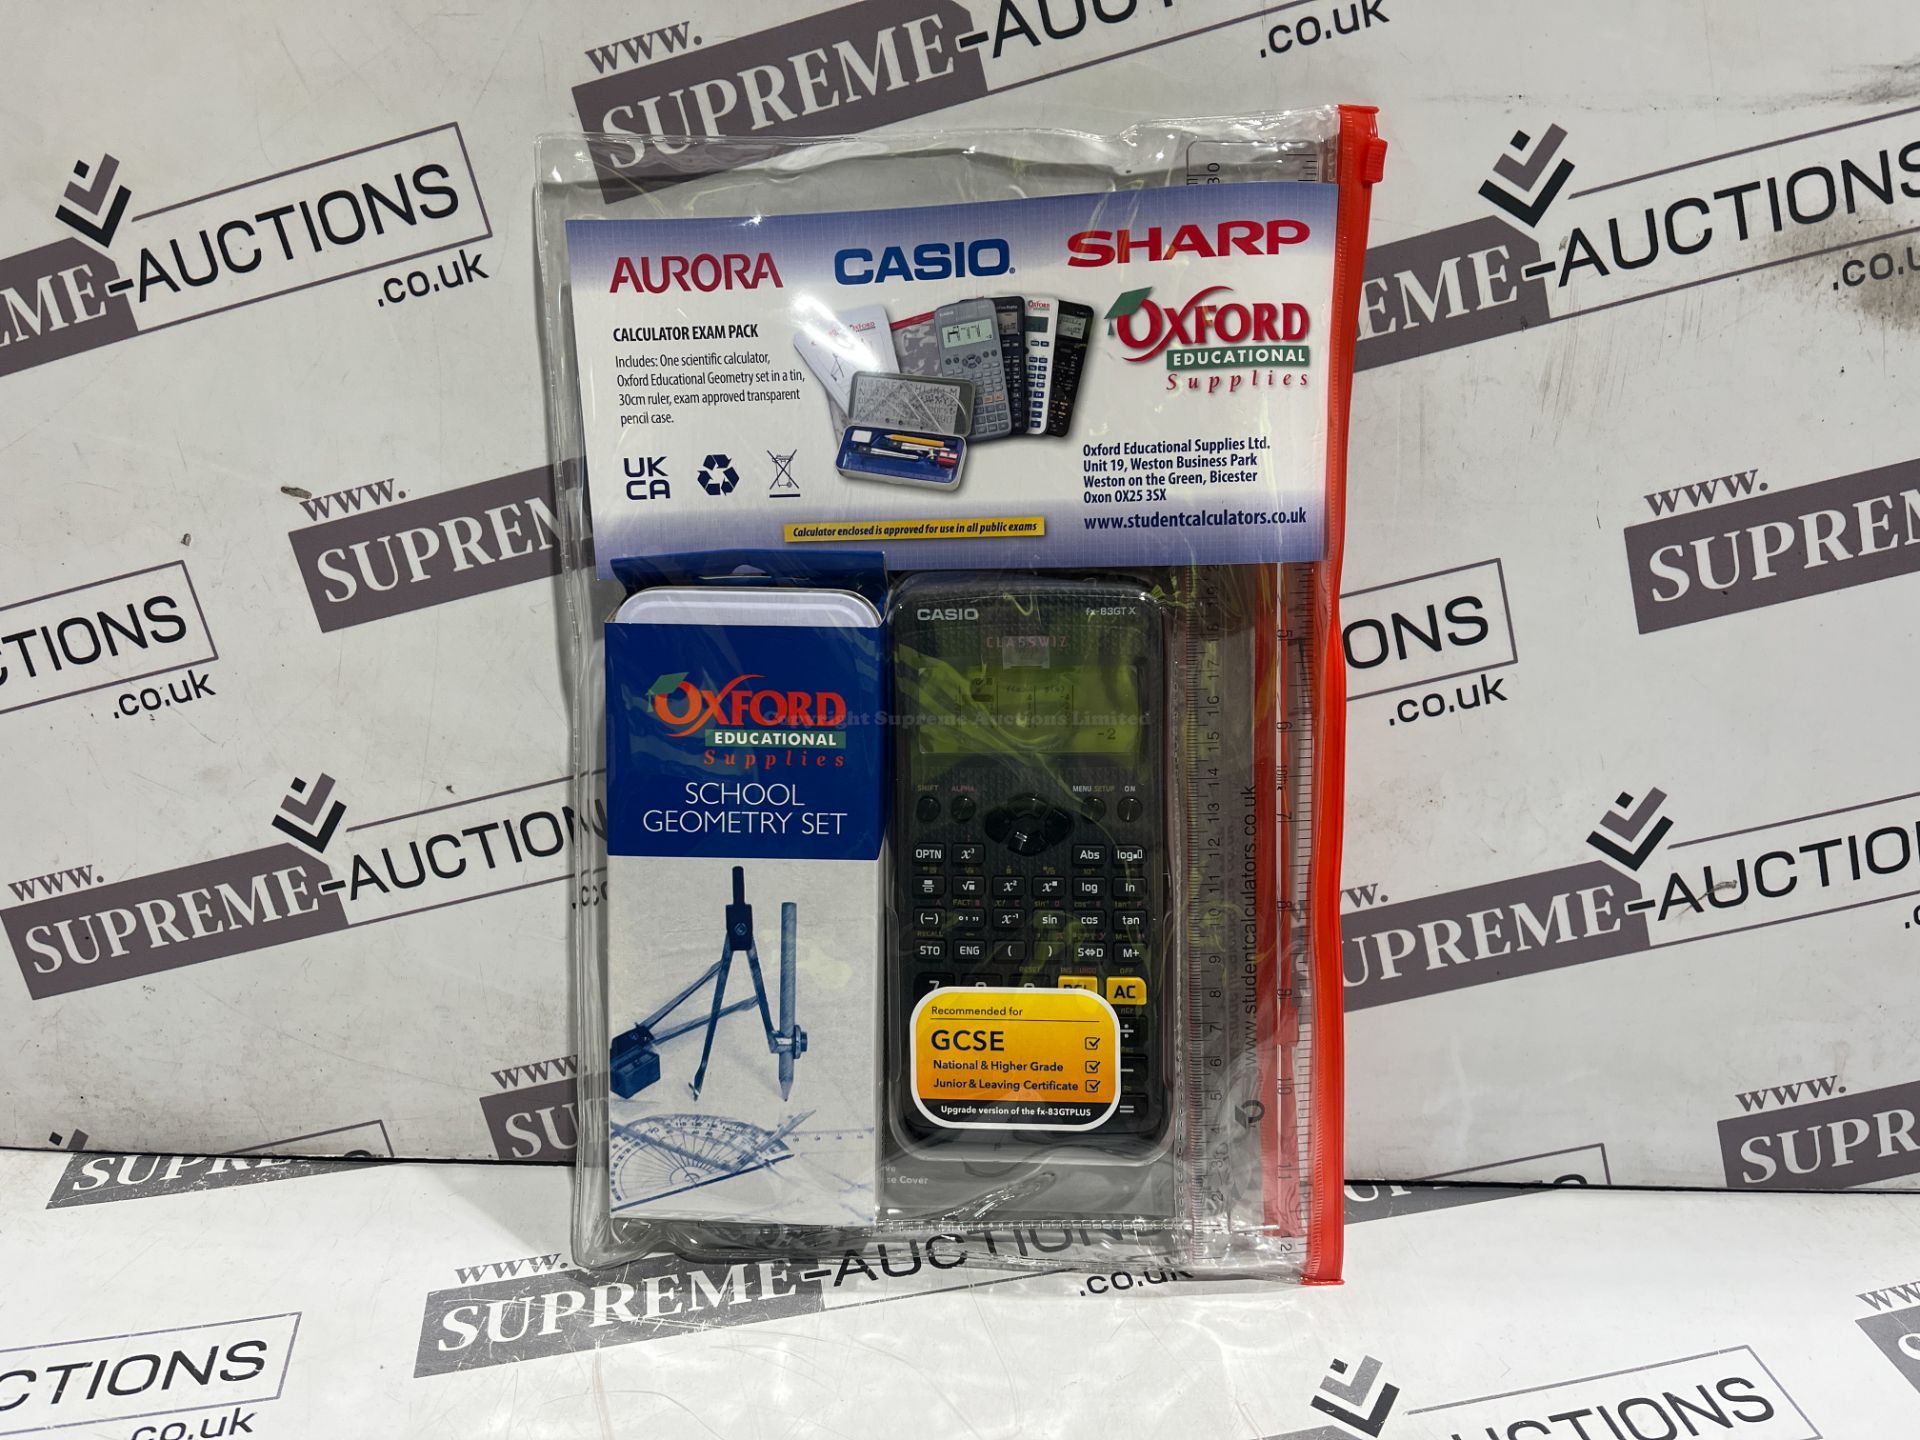 TRADE LOT 25 X BRAND NEW MATHEMATICS EXAM PACK WITH CASIO CALCULATOR, MATH INSTRUMENTS, RULERS ETC